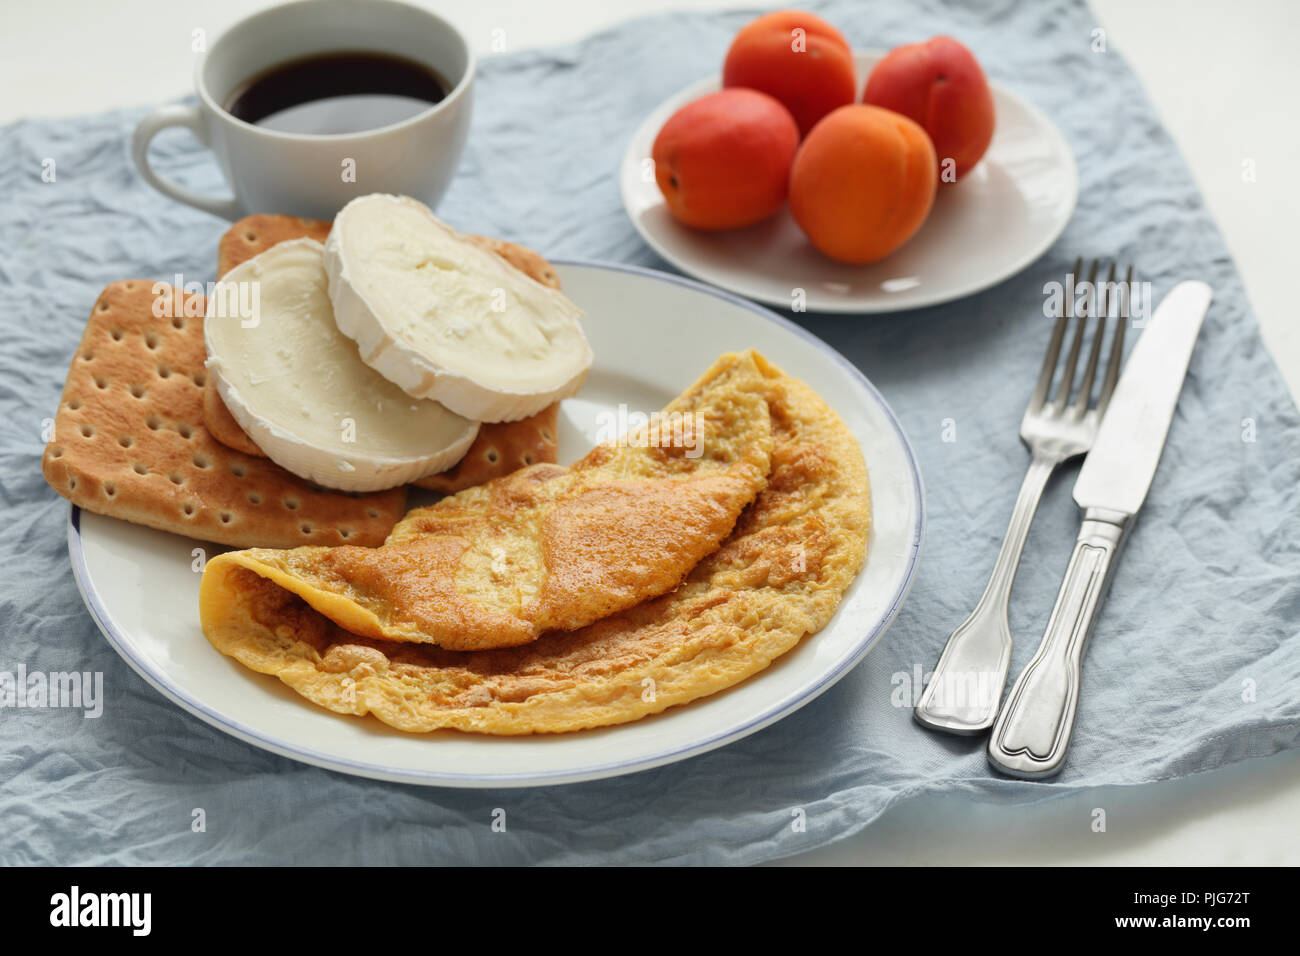 Breakfast with french omelet, goat cheese, black coffee, and apricot fruits Stock Photo